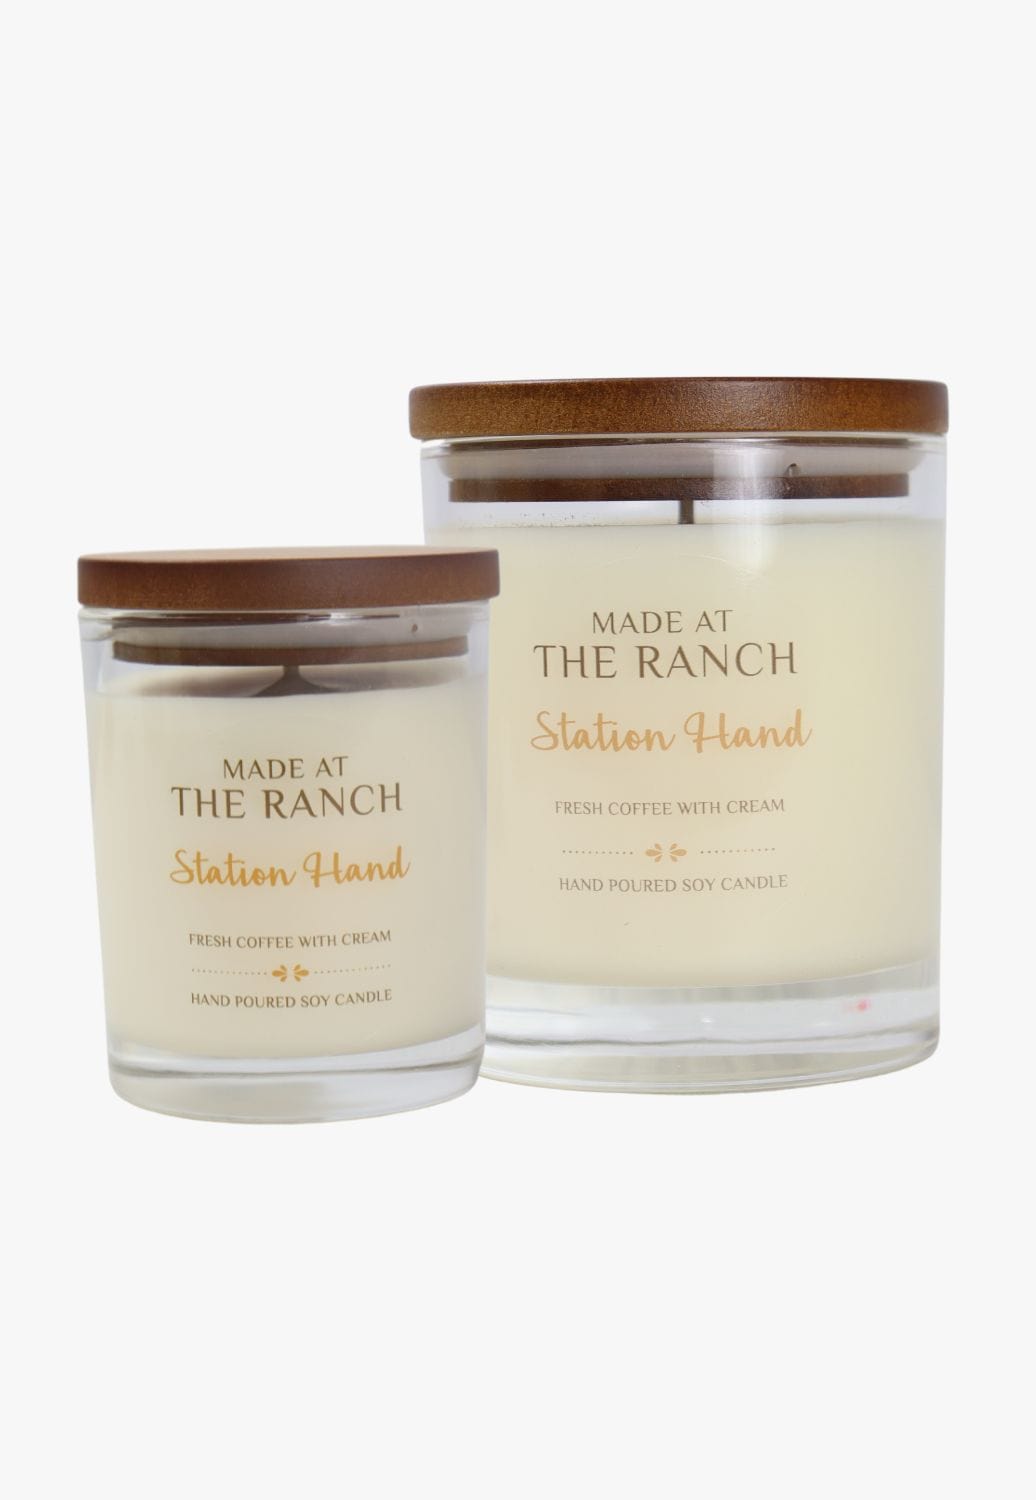 Made at The Ranch Homewares - General Made at The Ranch Station Hand Candle